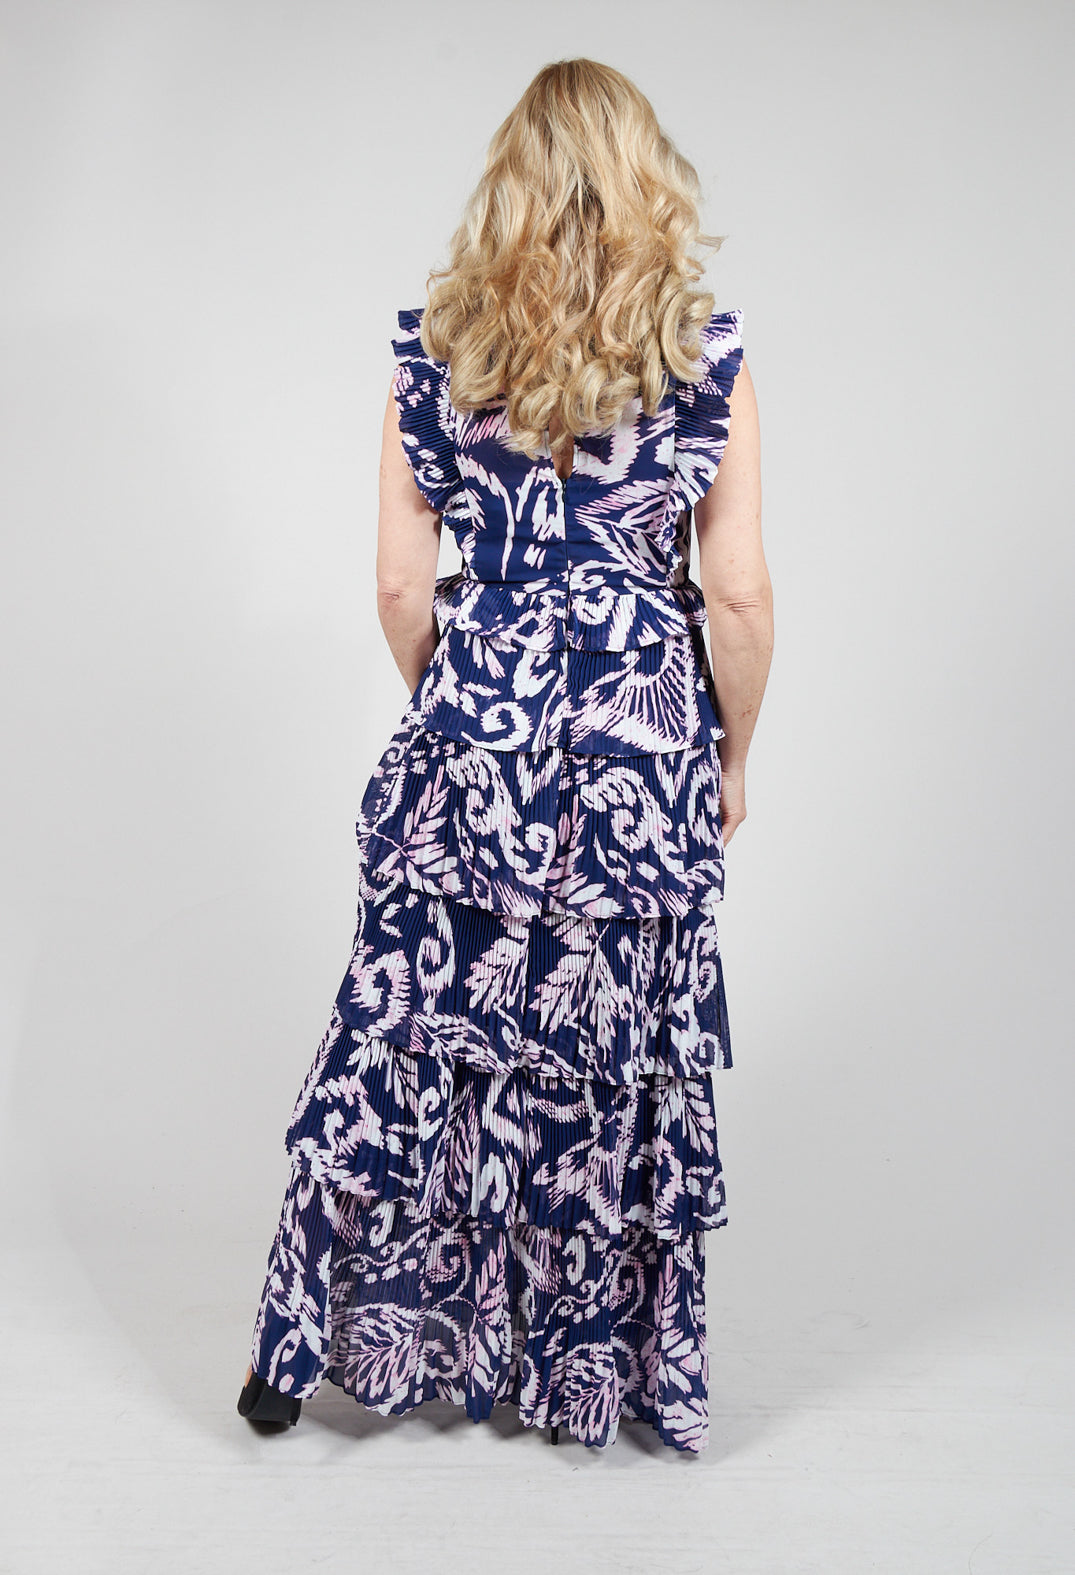 lady wearing a long tiered printed dress